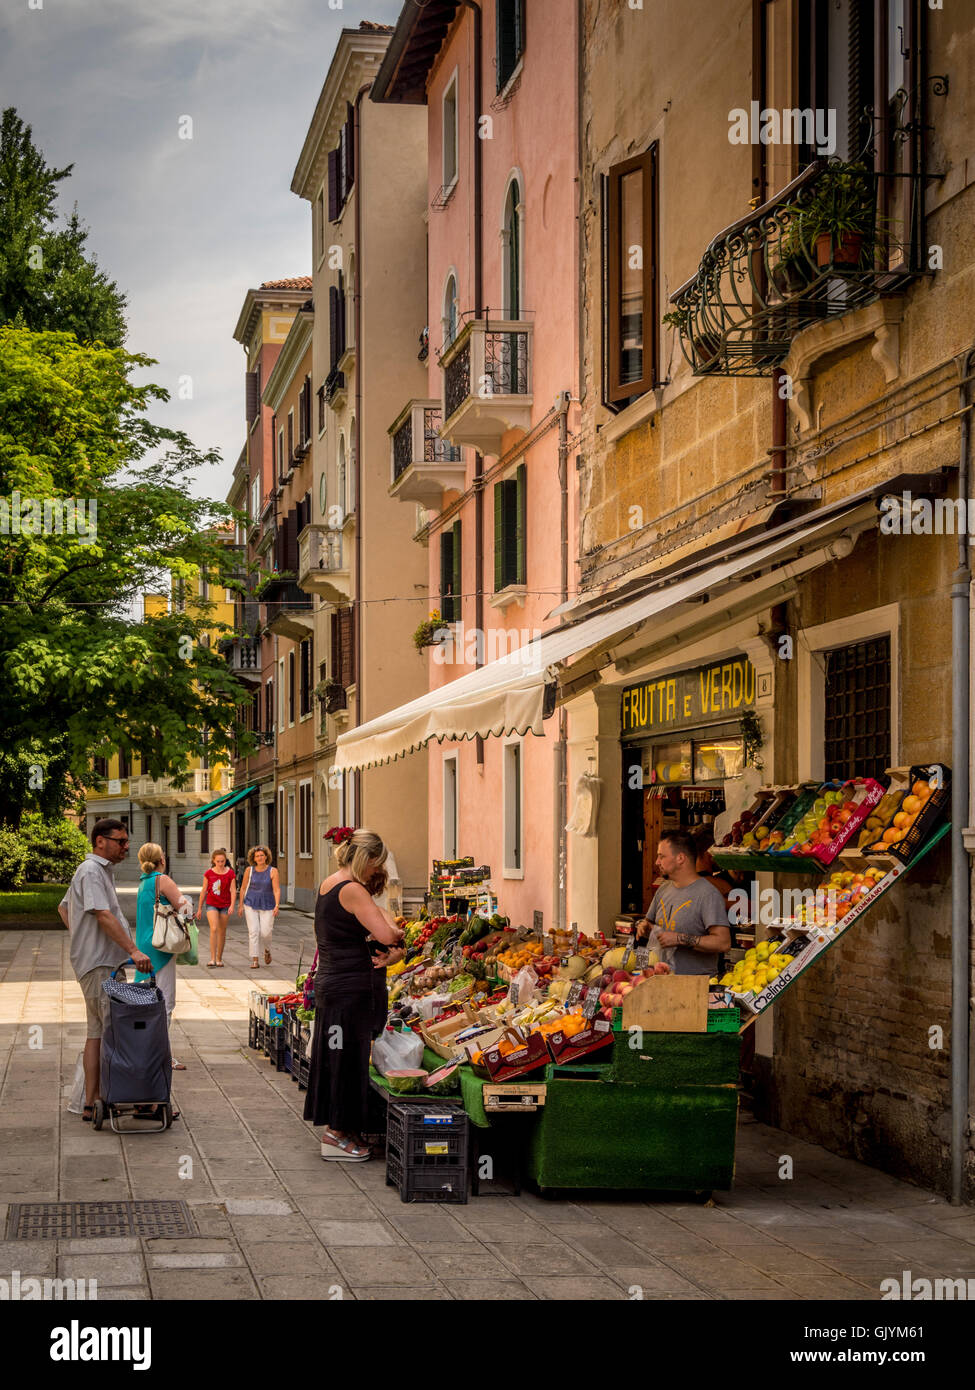 Outdoor fruit and vegetable stall in the Castello district of Venice, Italy. Stock Photo